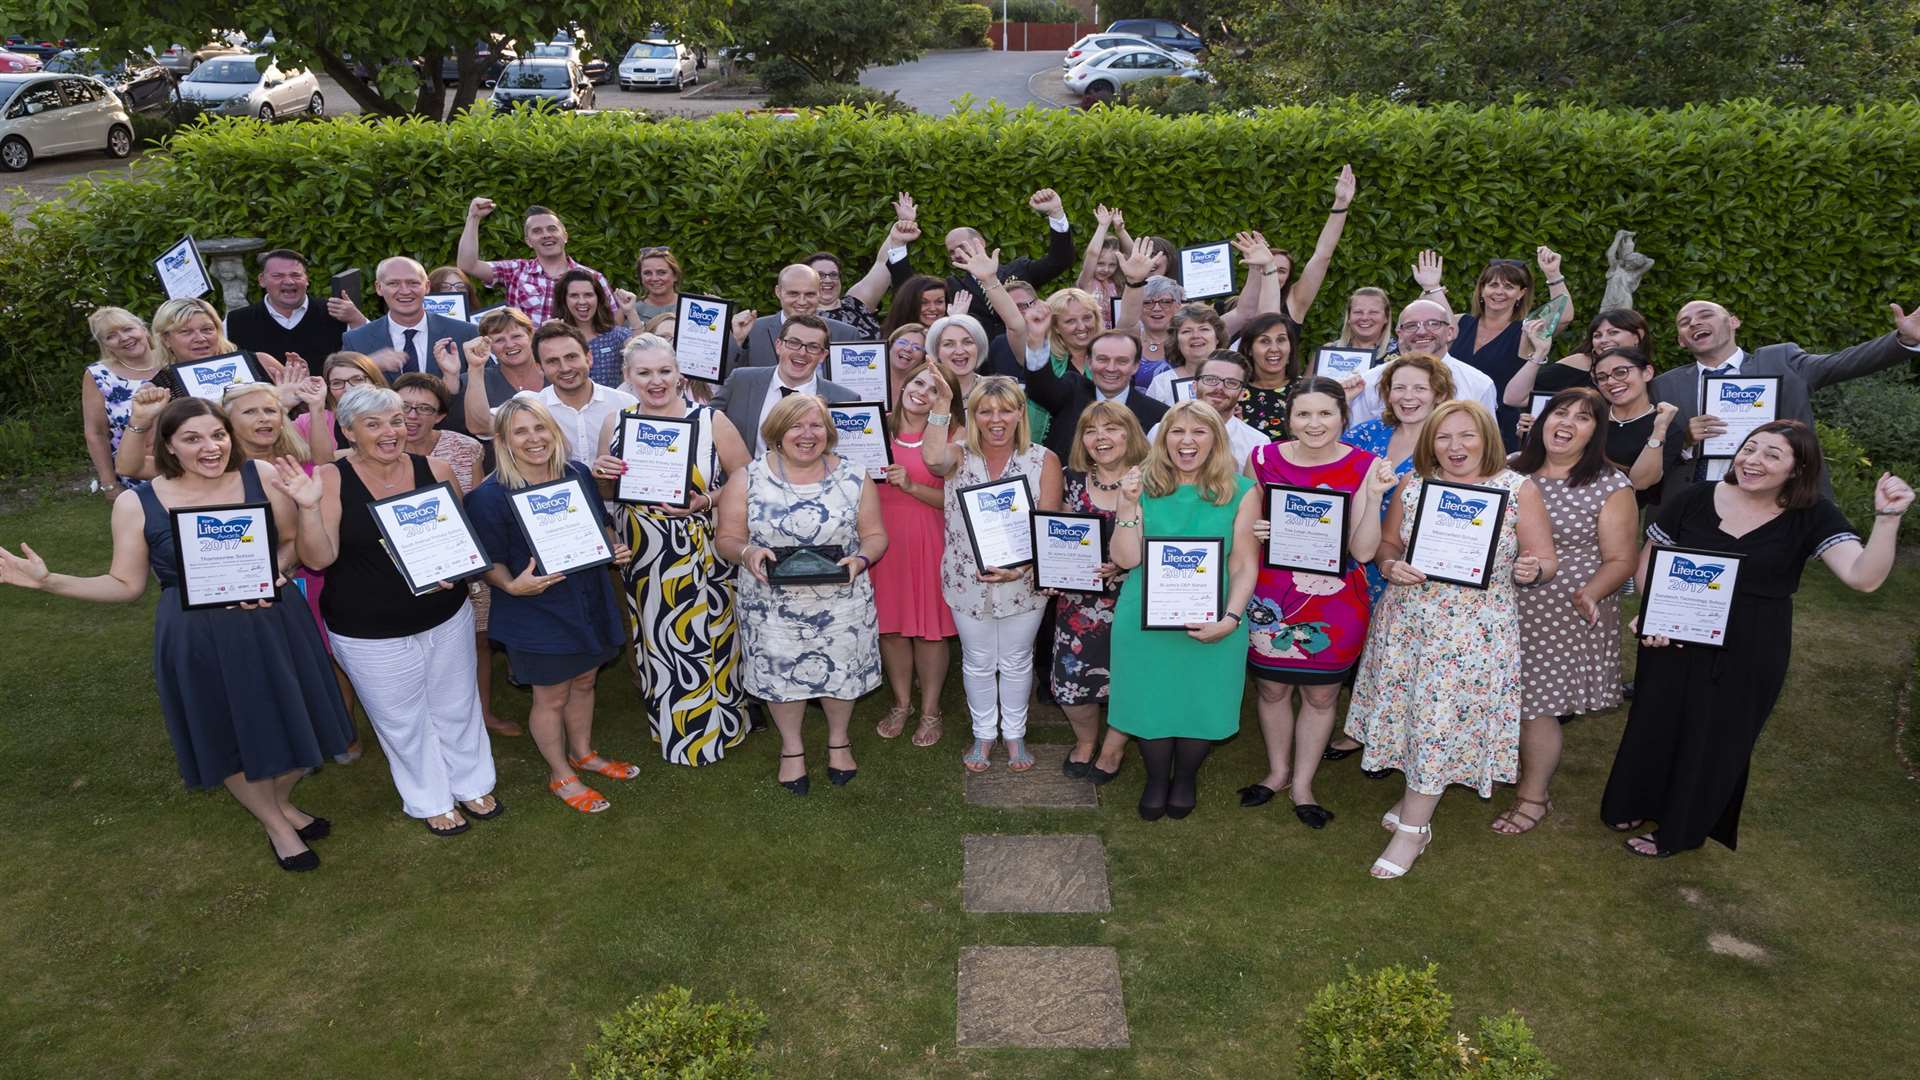 Winners and sponsors of the Kent Literacy Awards 2017 are joined by Phil Gallagher, star of CBeebies' Mister Maker television programme, at Hempstead House Hotel, Sittingbourne.